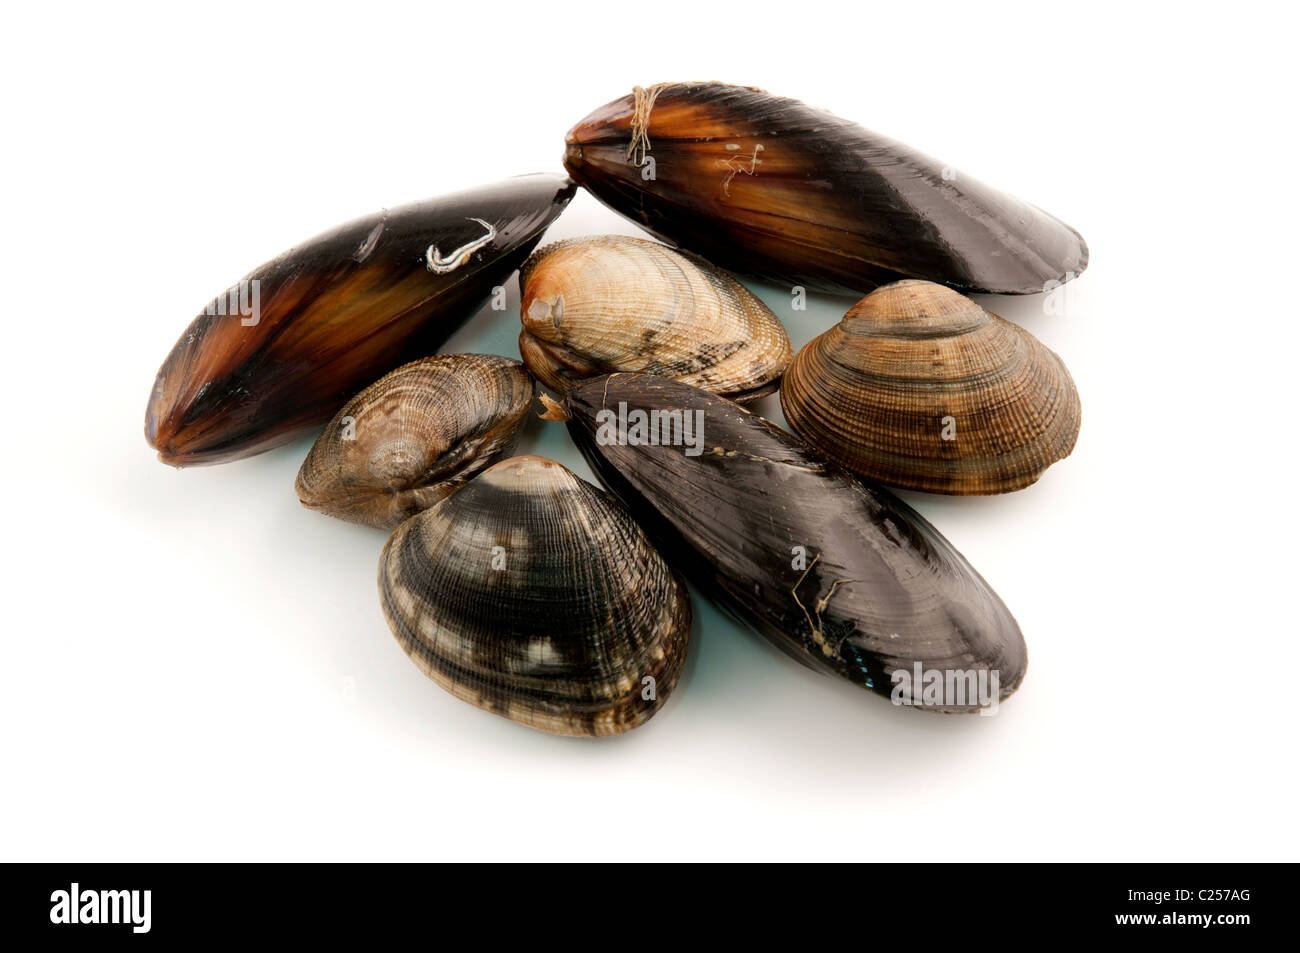 Edible molluscs (Mediterranean mussel and saltwater clams) on a white background Stock Photo